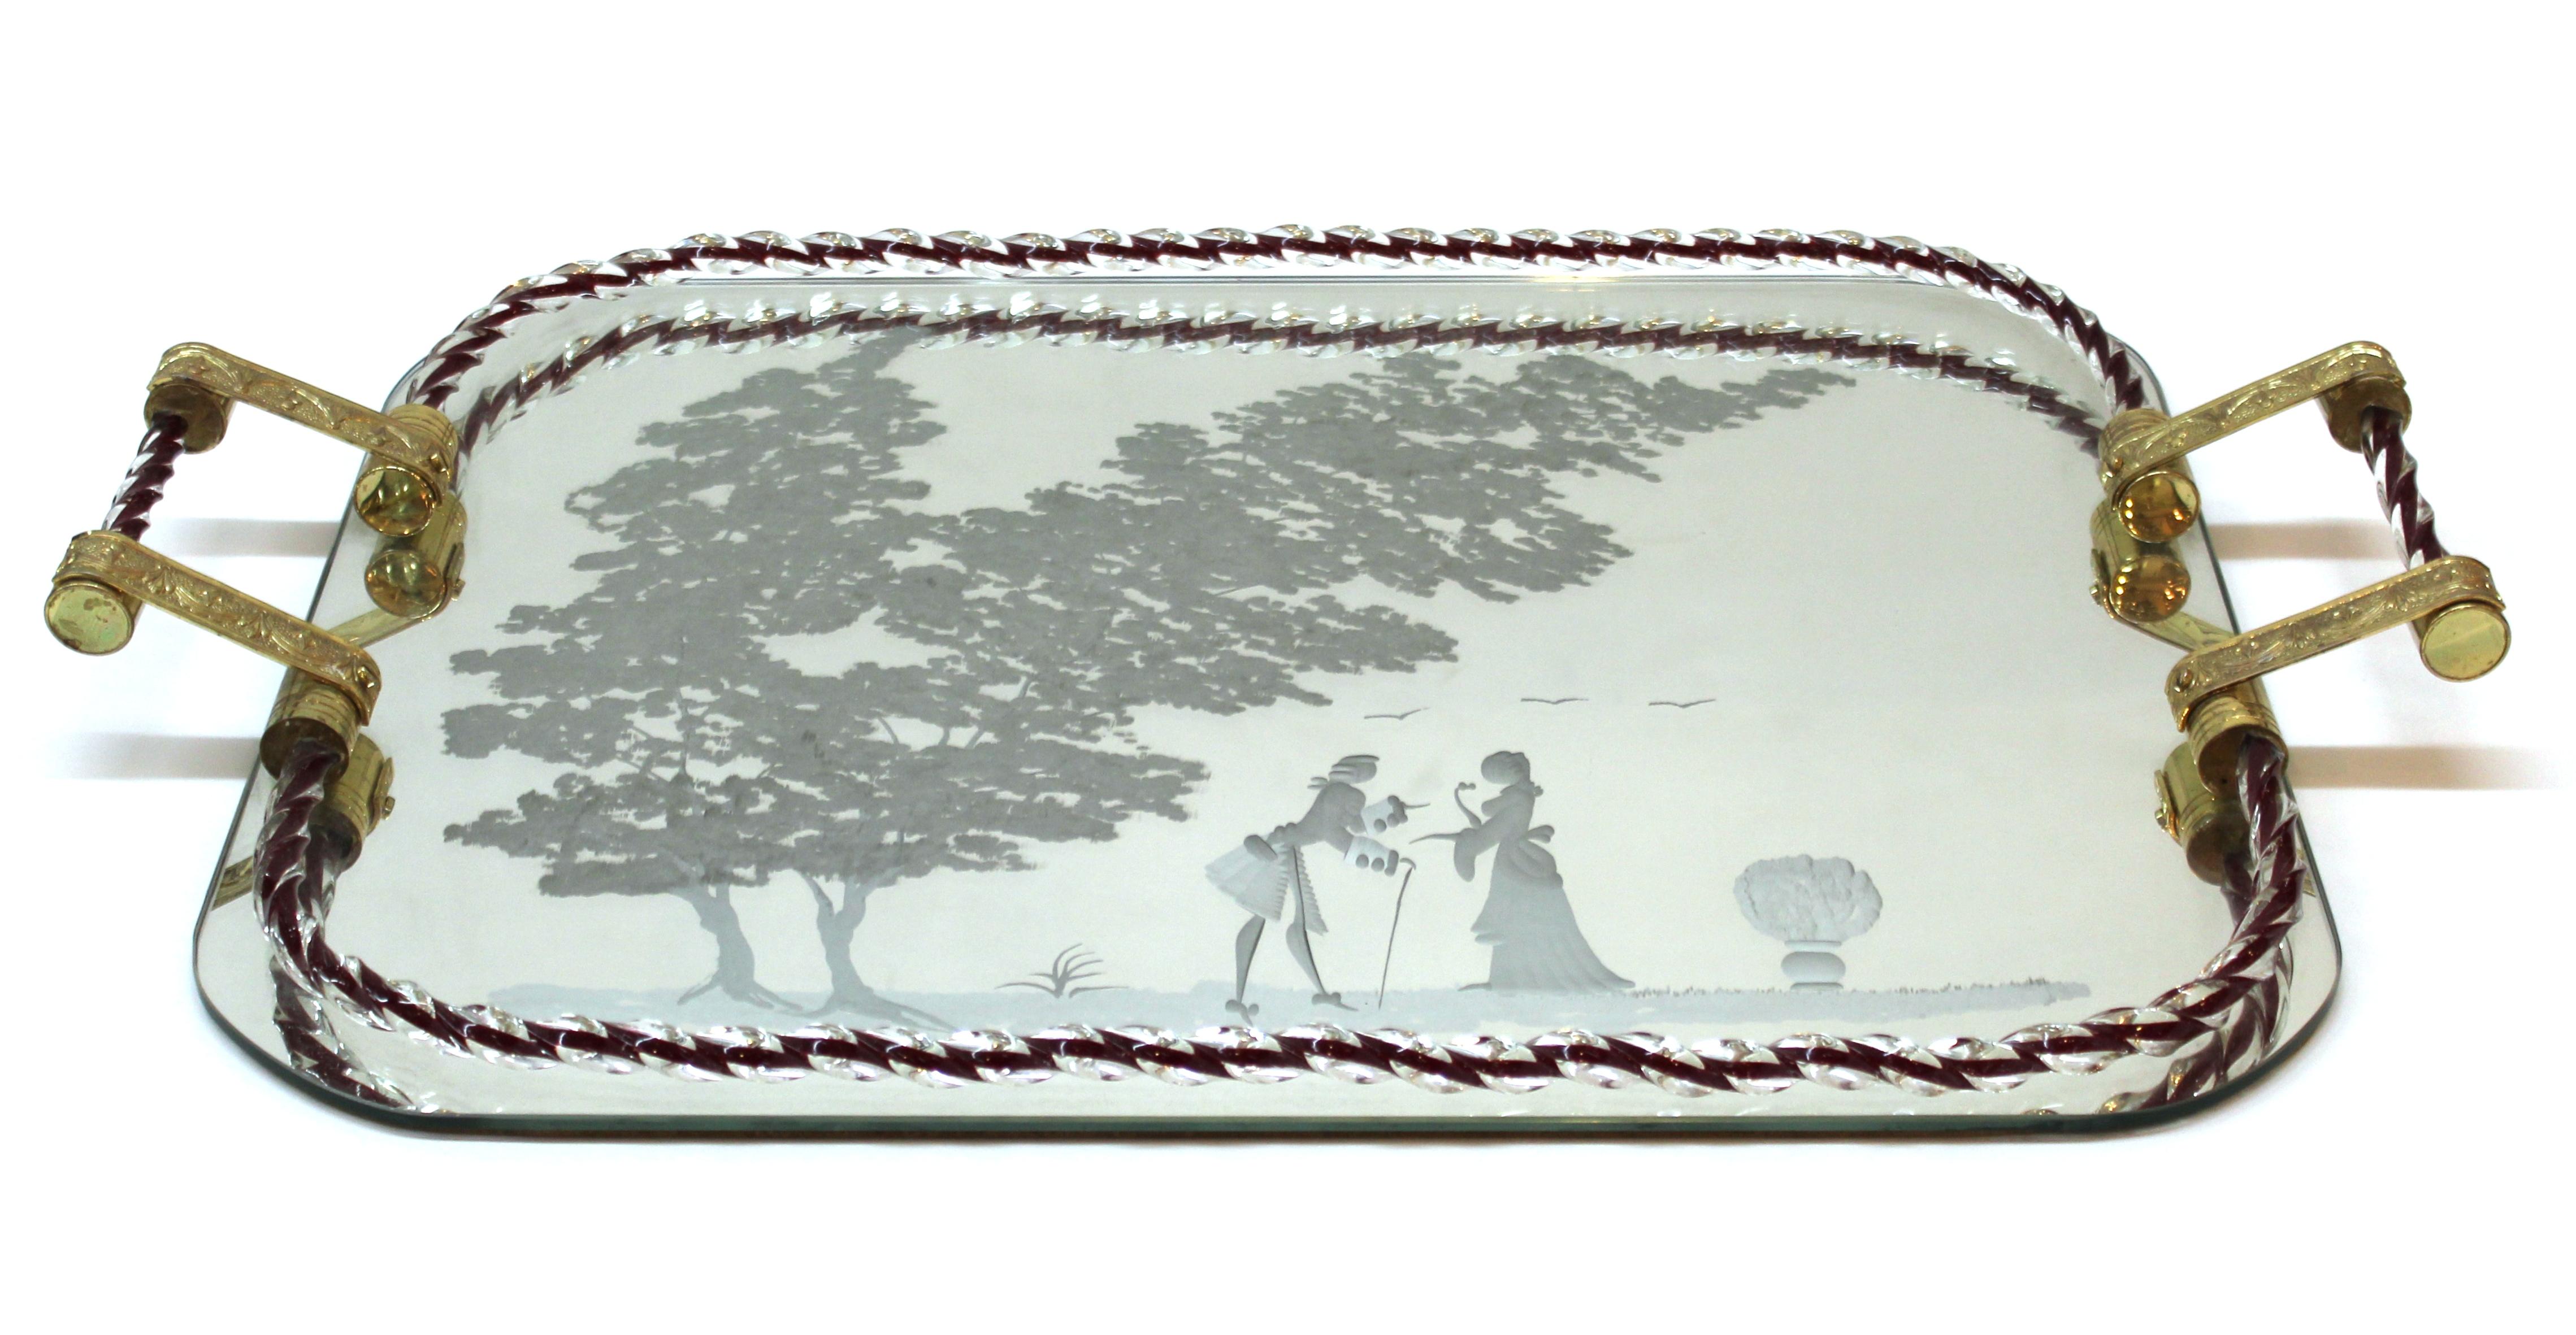 Italian Hollywood Regency serving tray attributed to Ercole Barovier. The piece has a Murano glass gallery and mirrored surface etched with a scene of 18th century lovers and supporting gilt brass handles. Likely made in the 1940s, the piece is in